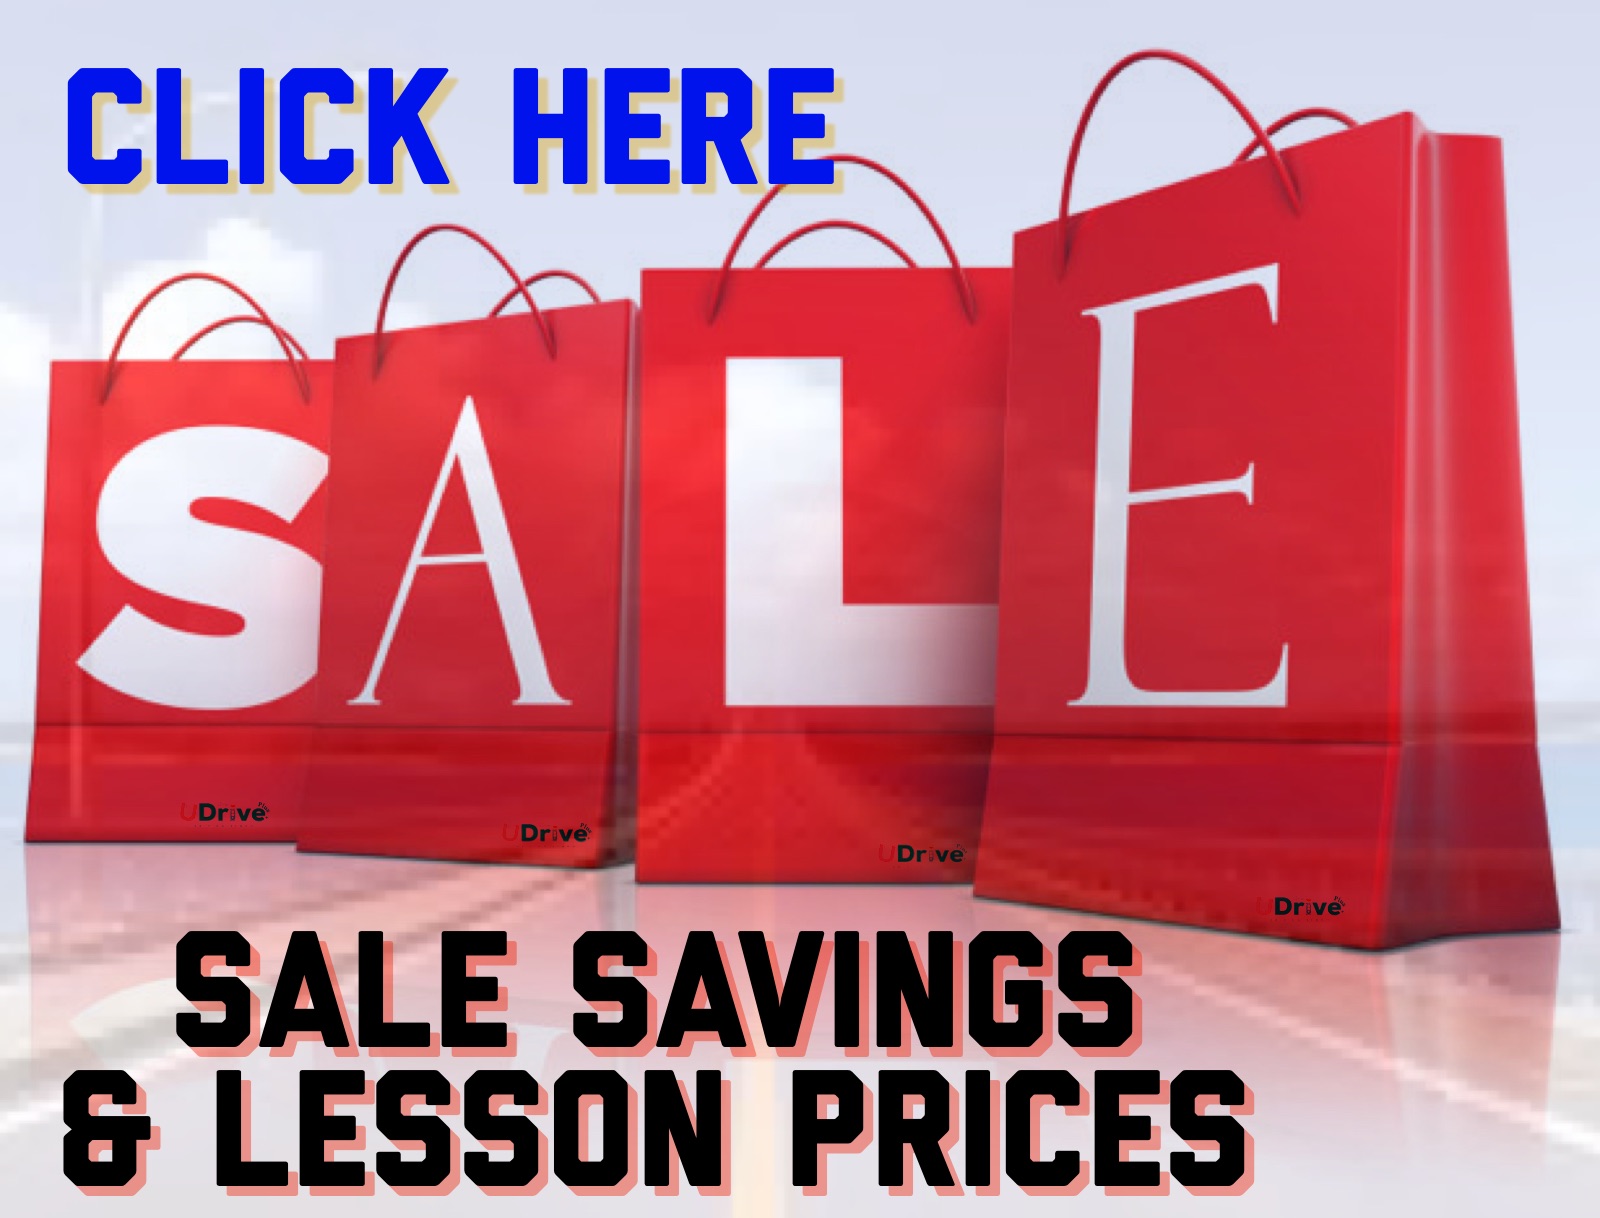 Sale and lesson prices udrive+